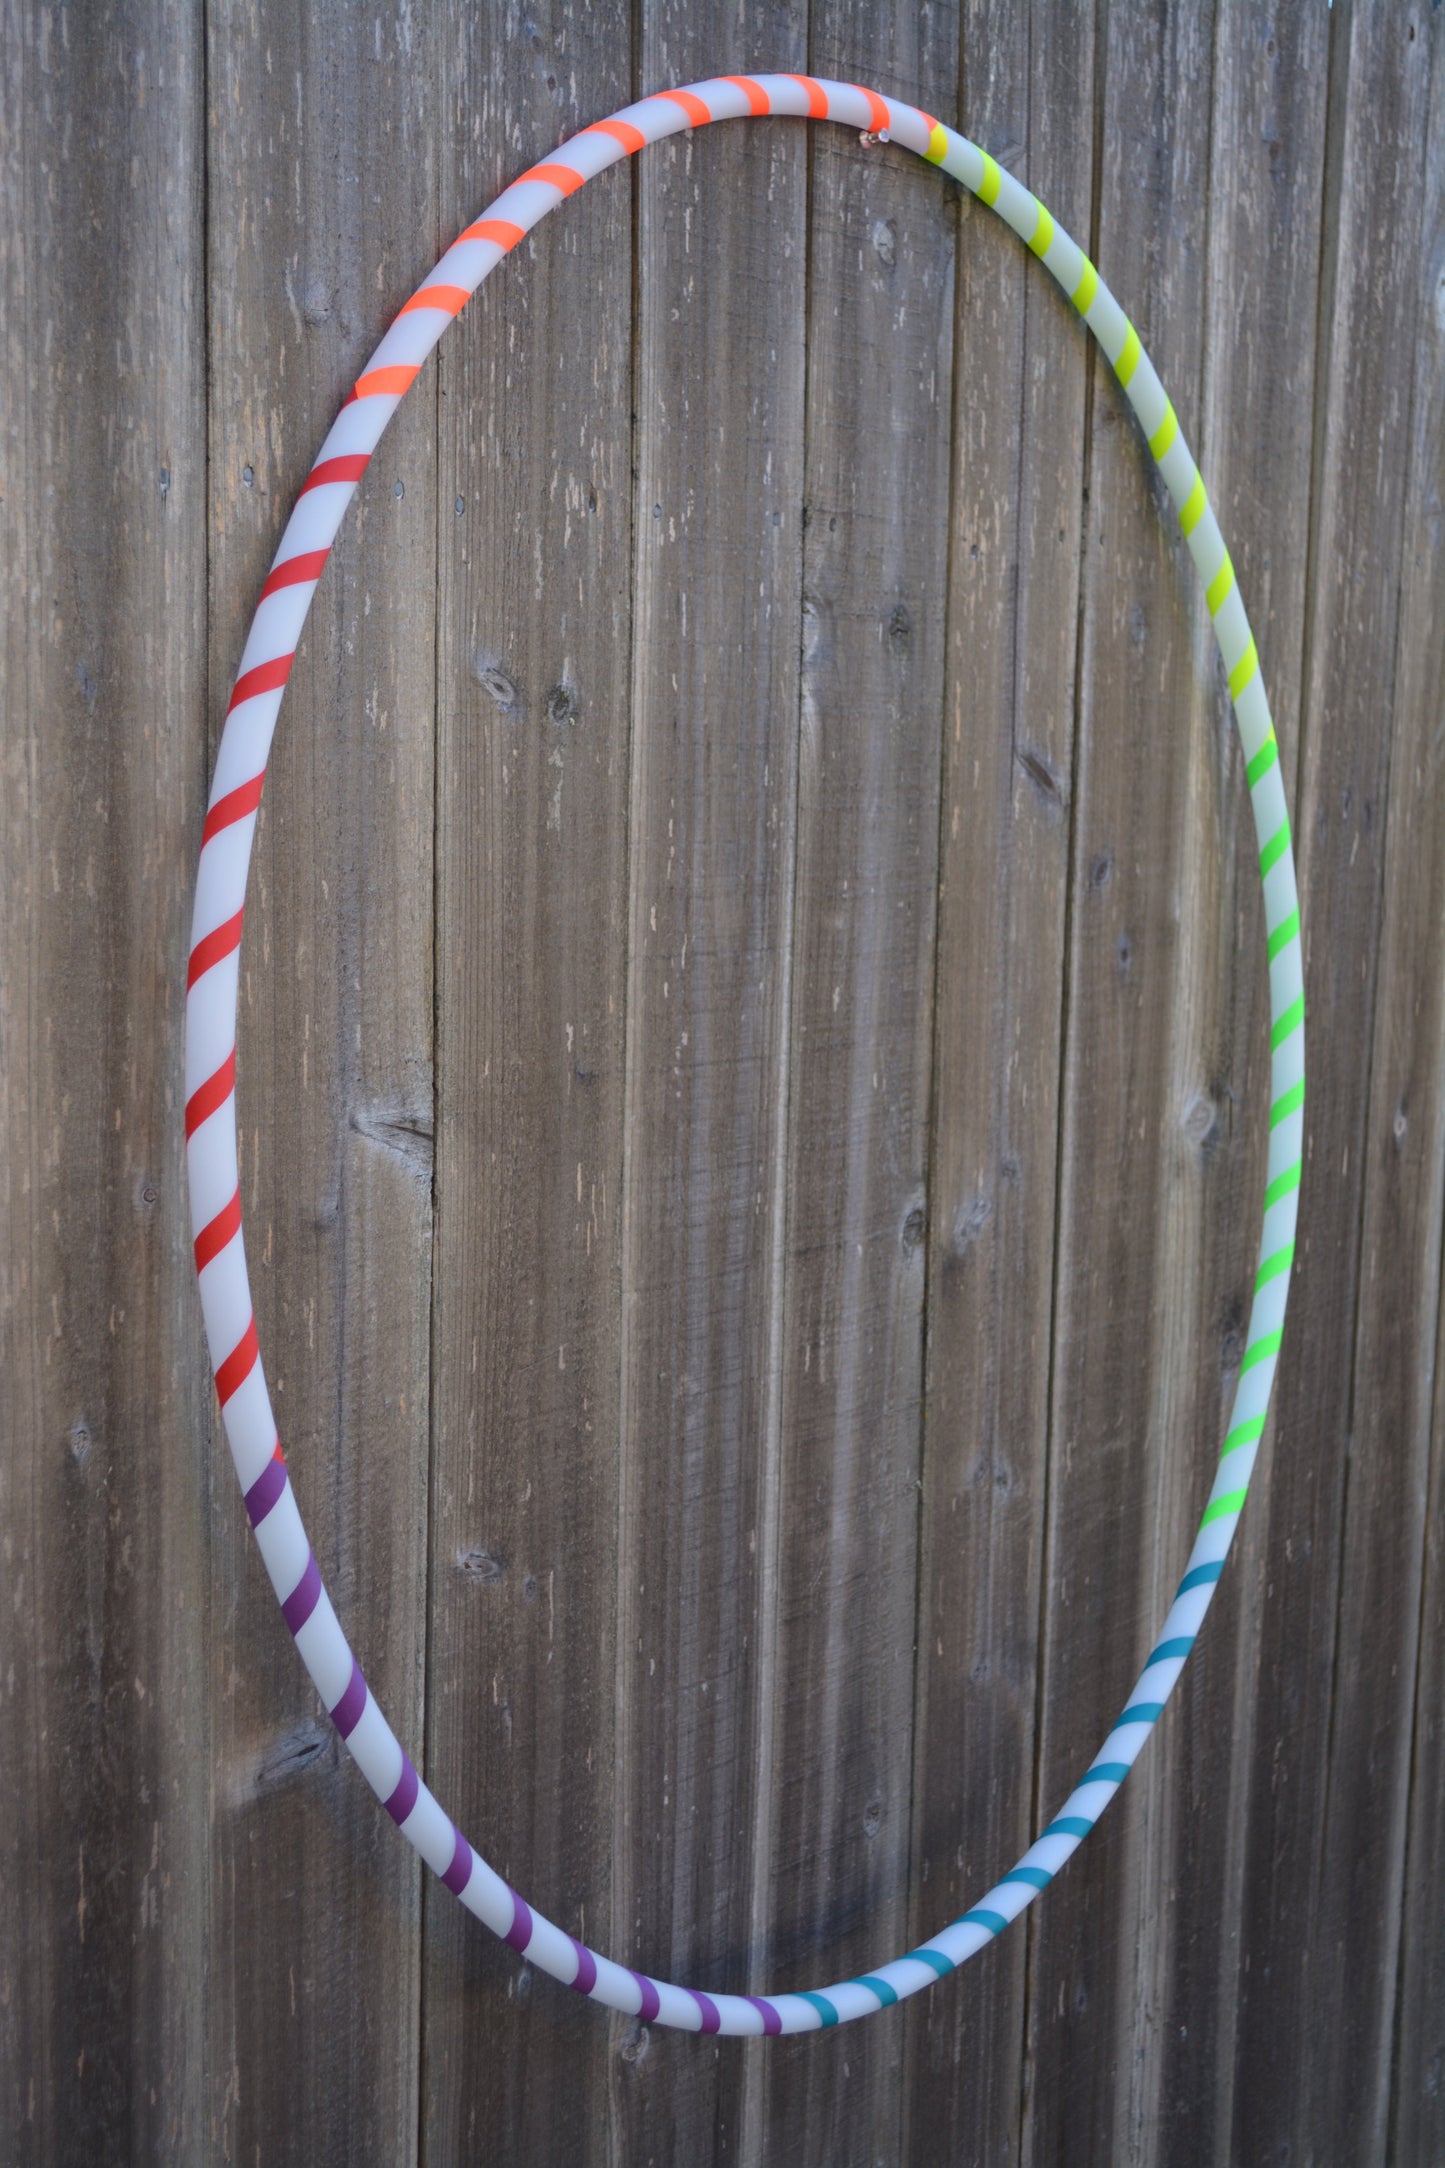 HDPE & Polypro Beginner Hula Hoops with Colored Gaffer Tape - Best Seller